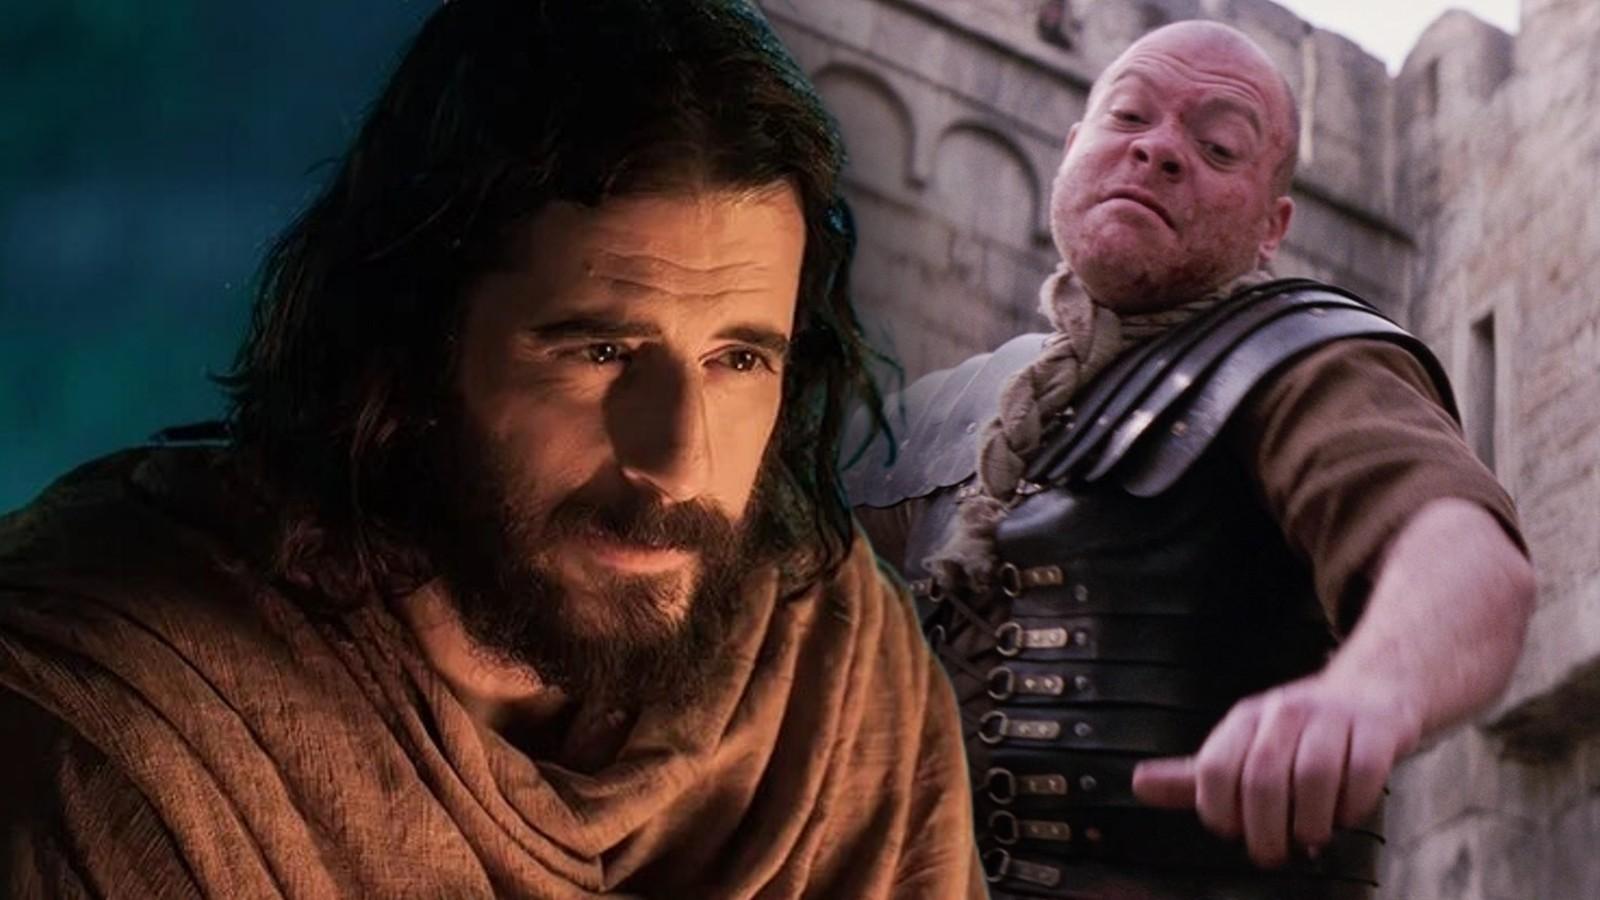 Jonathan Roumie in The Chosen and a Roman soldier in The Passion of the Christ